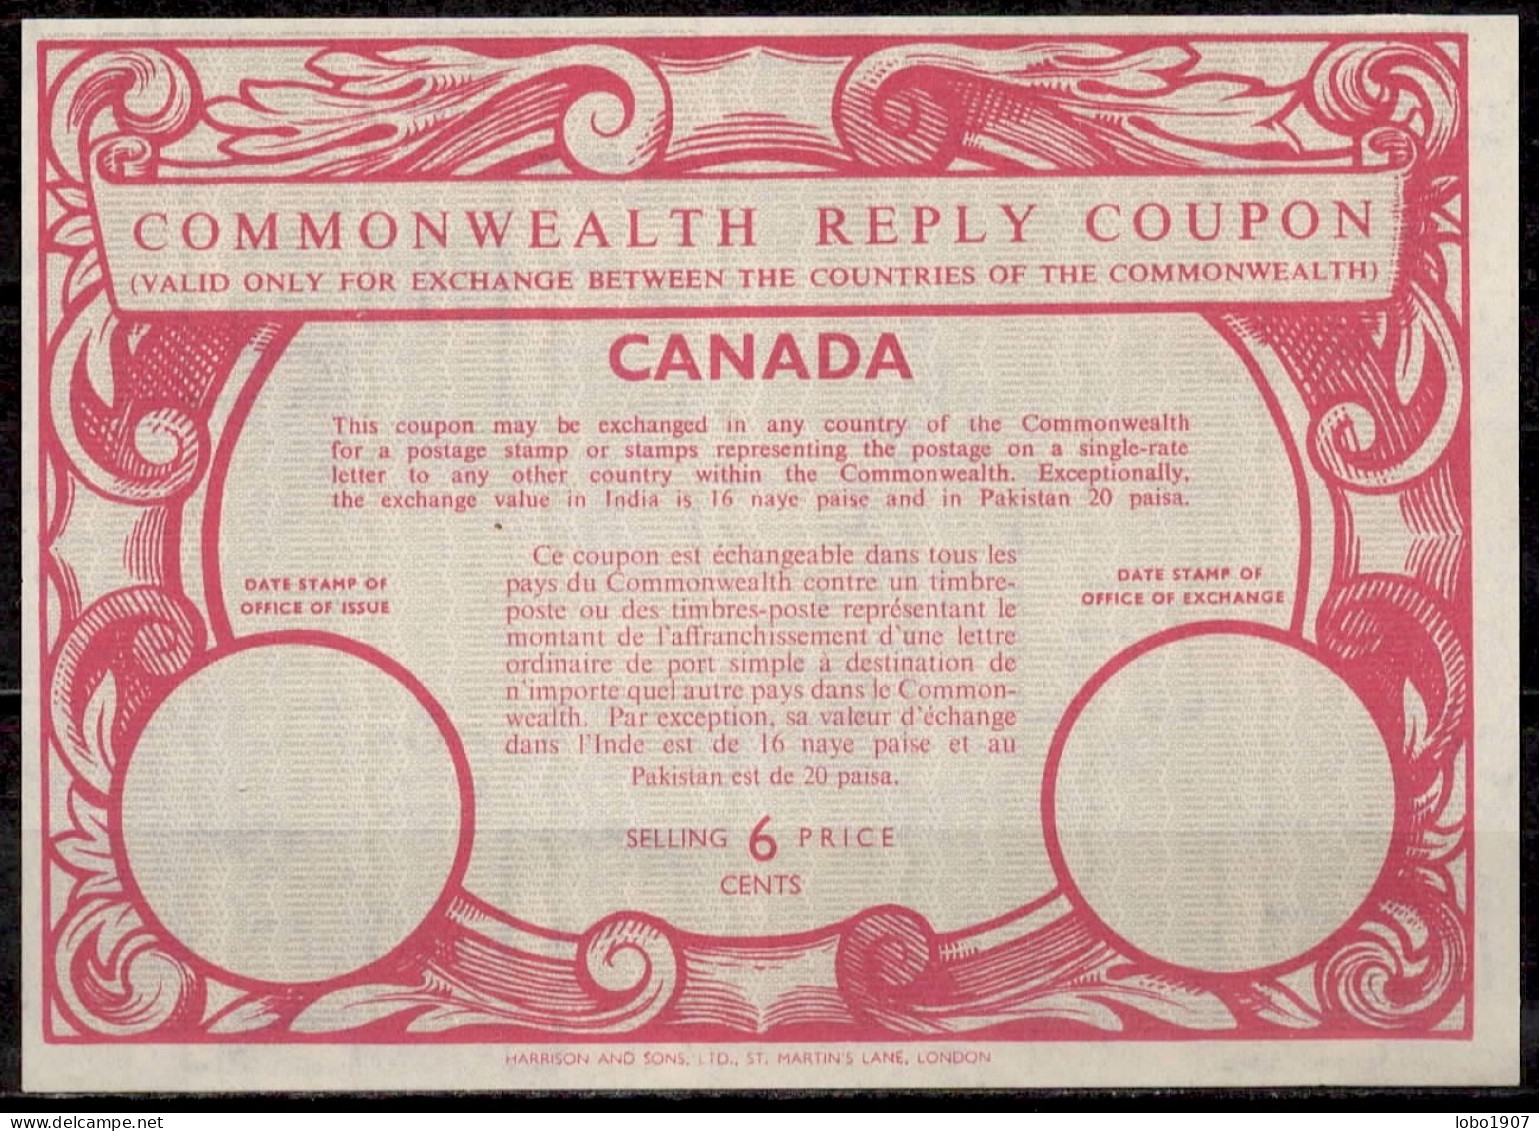 CANADA 1907-2007  Collection of 39 International, Imperial and Commonwealth Reply Coupon Reponse Antwortschein  IRC IAS